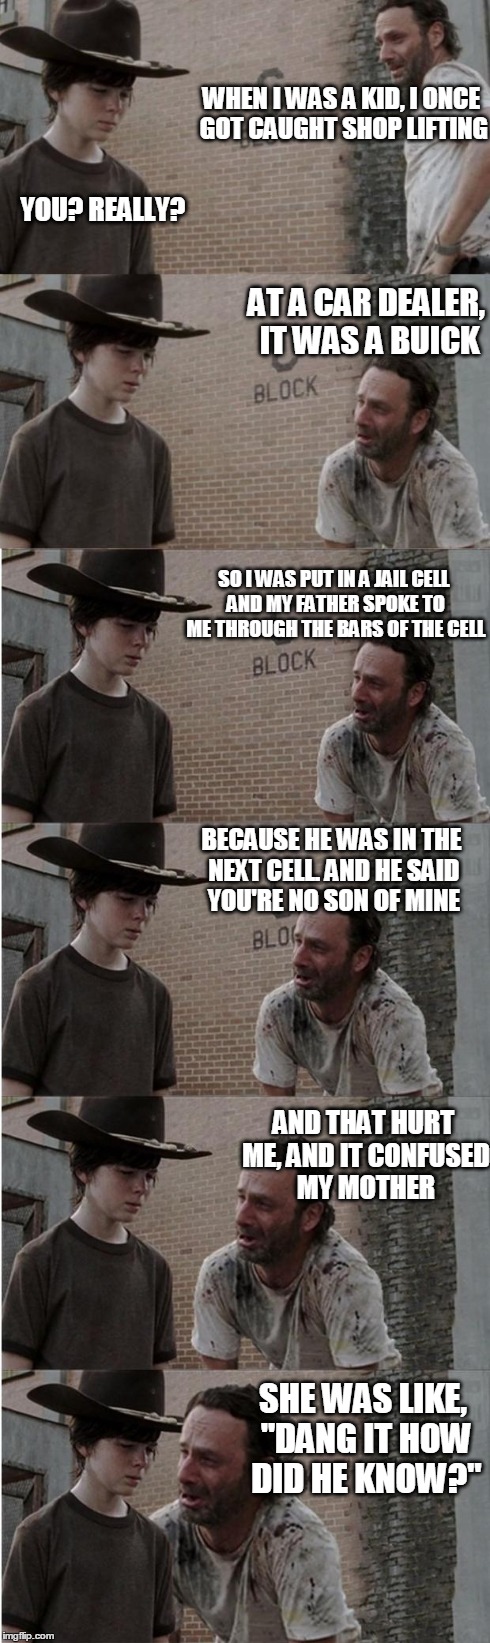 Rick and Carl Longer | WHEN I WAS A KID, I ONCE GOT CAUGHT SHOP LIFTING AT A CAR DEALER, IT WAS A BUICK SO I WAS PUT IN A JAIL CELL AND MY FATHER SPOKE TO ME THROU | image tagged in memes,rick and carl longer | made w/ Imgflip meme maker